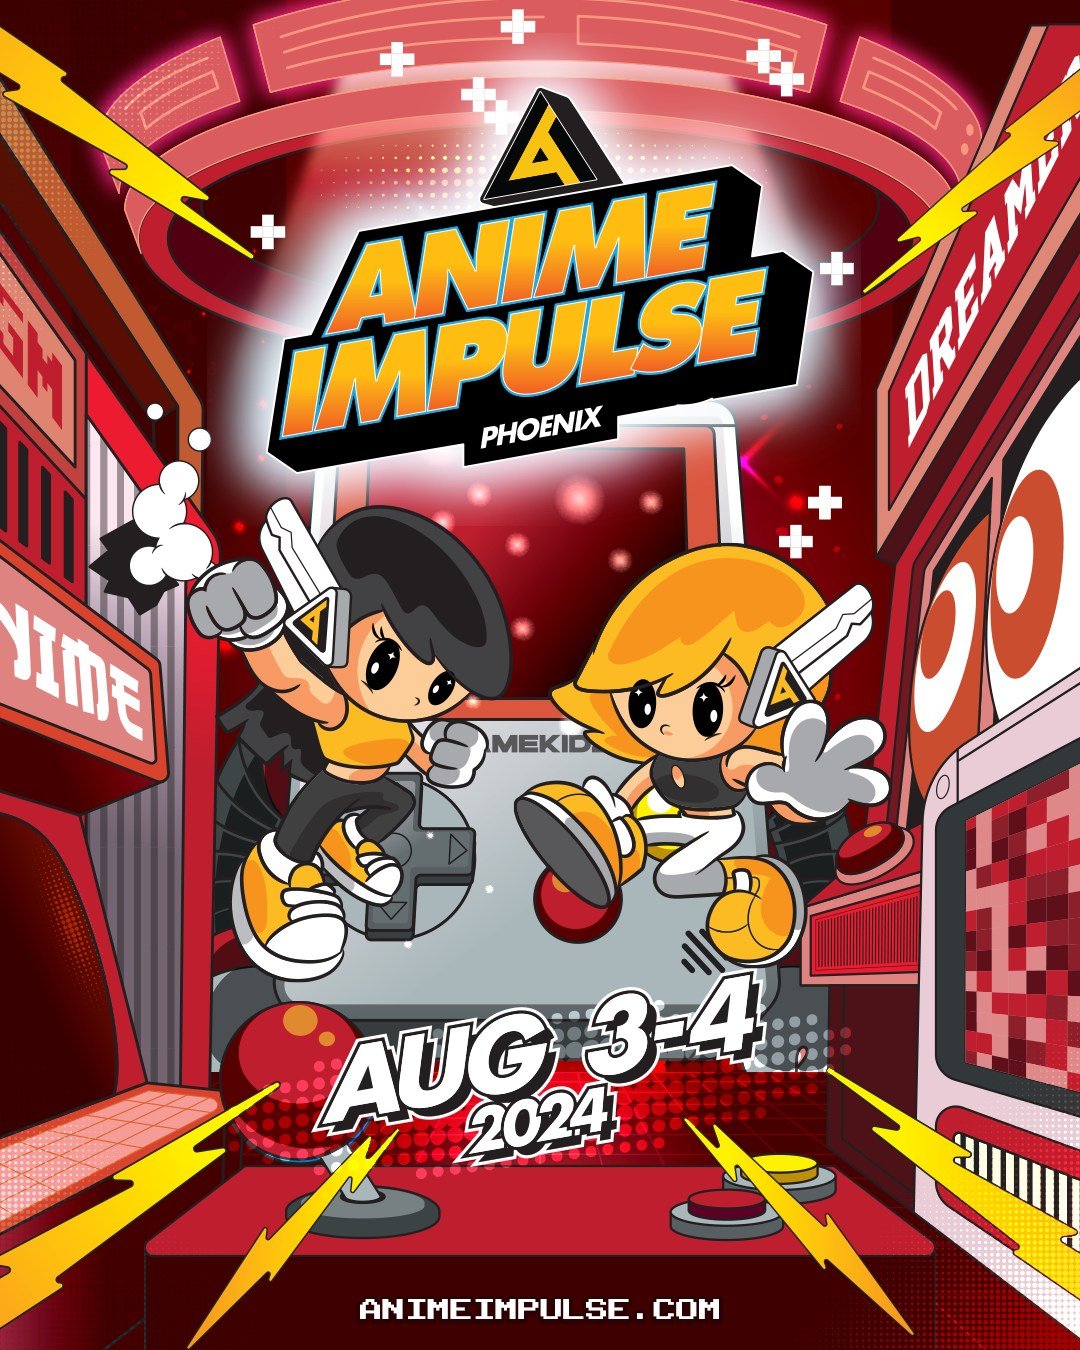 🌵 ANIME IMPULSE TAKES ON THE VALLEY OF THE SUN 🌵

Don&rsquo;t miss ANIME Impulse Phoenix 2024! ✨ Bringing the heat, #ANIMEImpulsePHX2024 is happening at Phoenix Convention Center on Aug. 3-4, 2024~!🏜️☀️💥 There&rsquo;ll be amazing cosplays, a deck